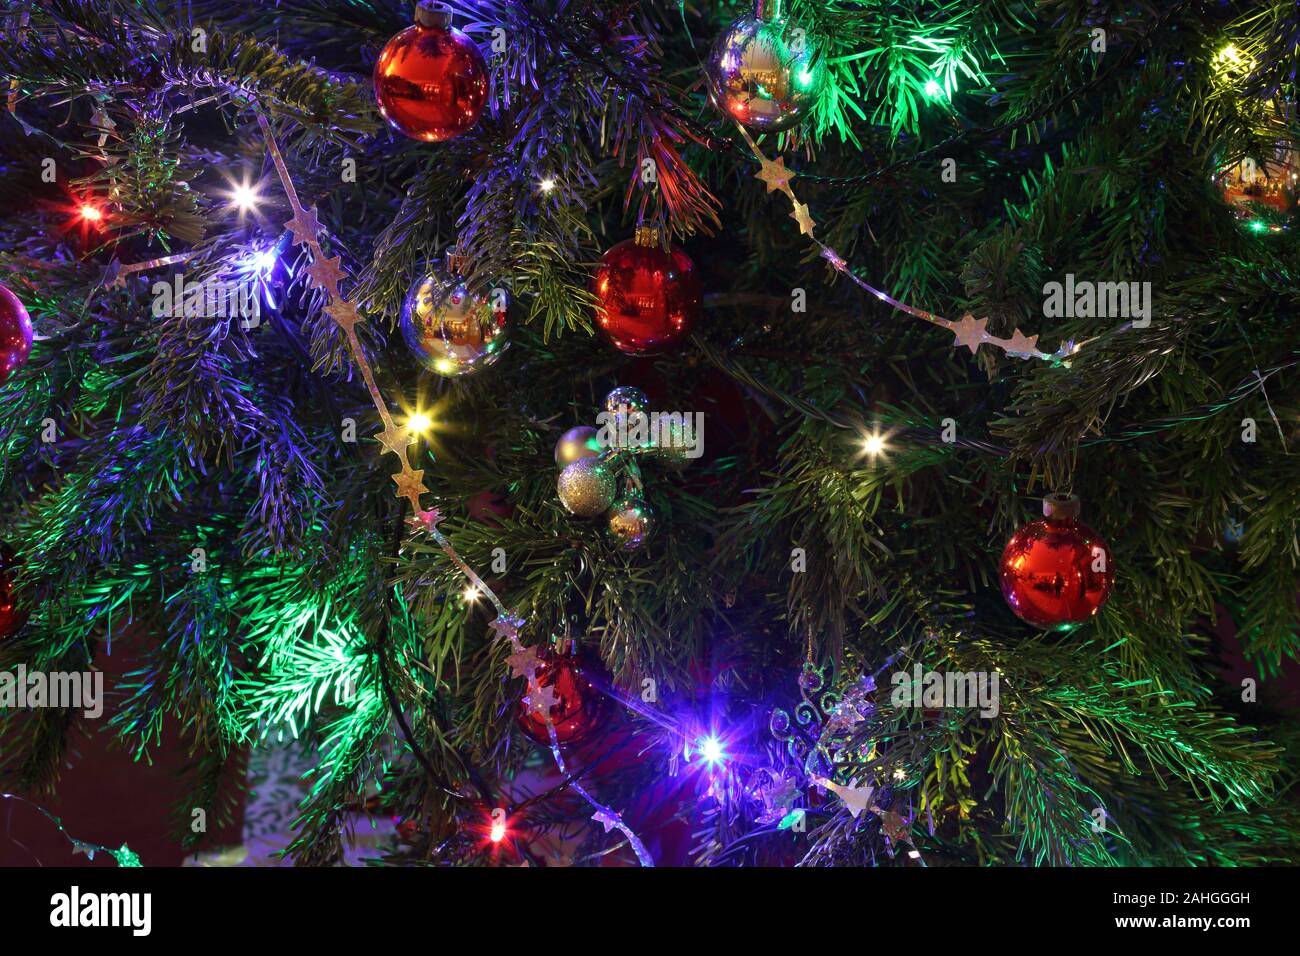 Close-up of part of a Christmas tree with decorations, Christmas baubles, tinsel, stars, and fairy lights, Haslemere, Surrey, UK. Stock Photo